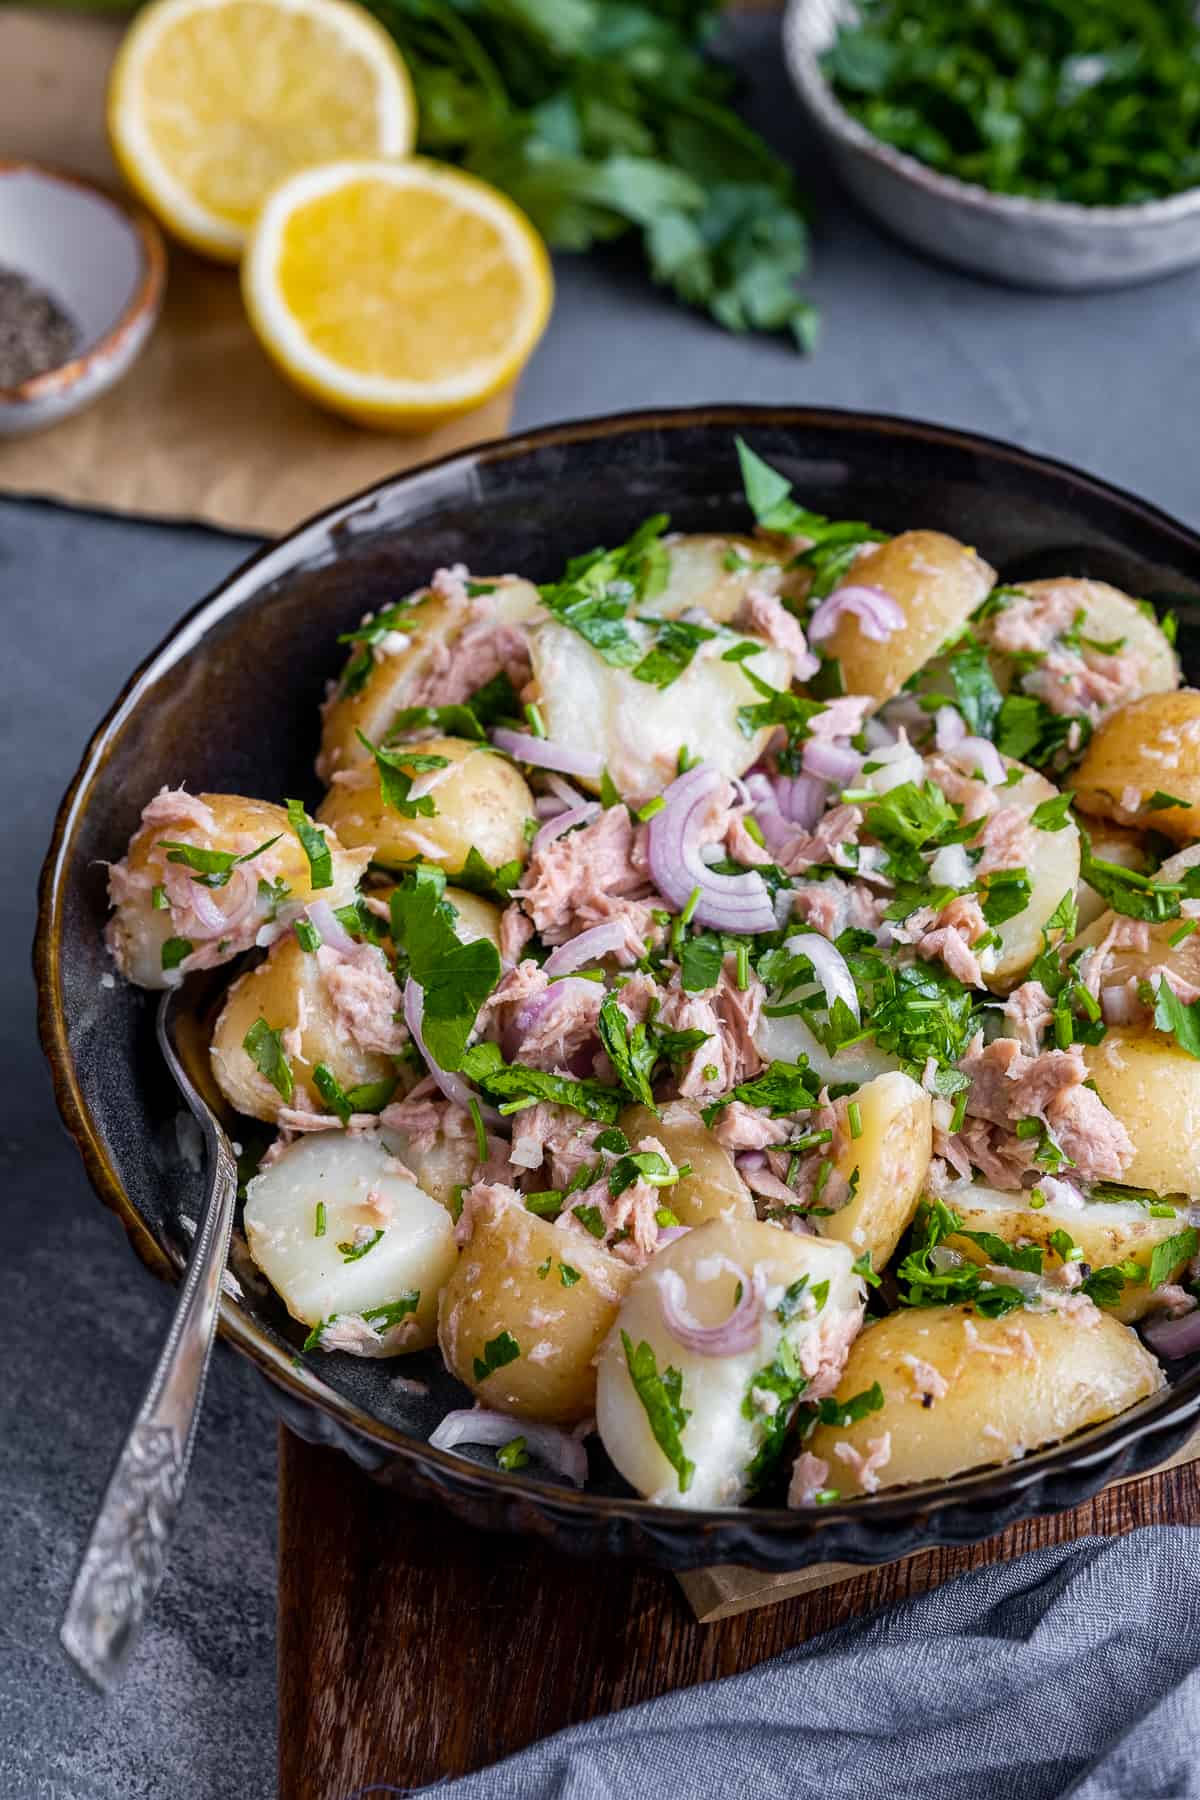 Potato salad with tuna, onions and parsley in a black bowl, a fork inside it, lemon halves and parsley behind it.